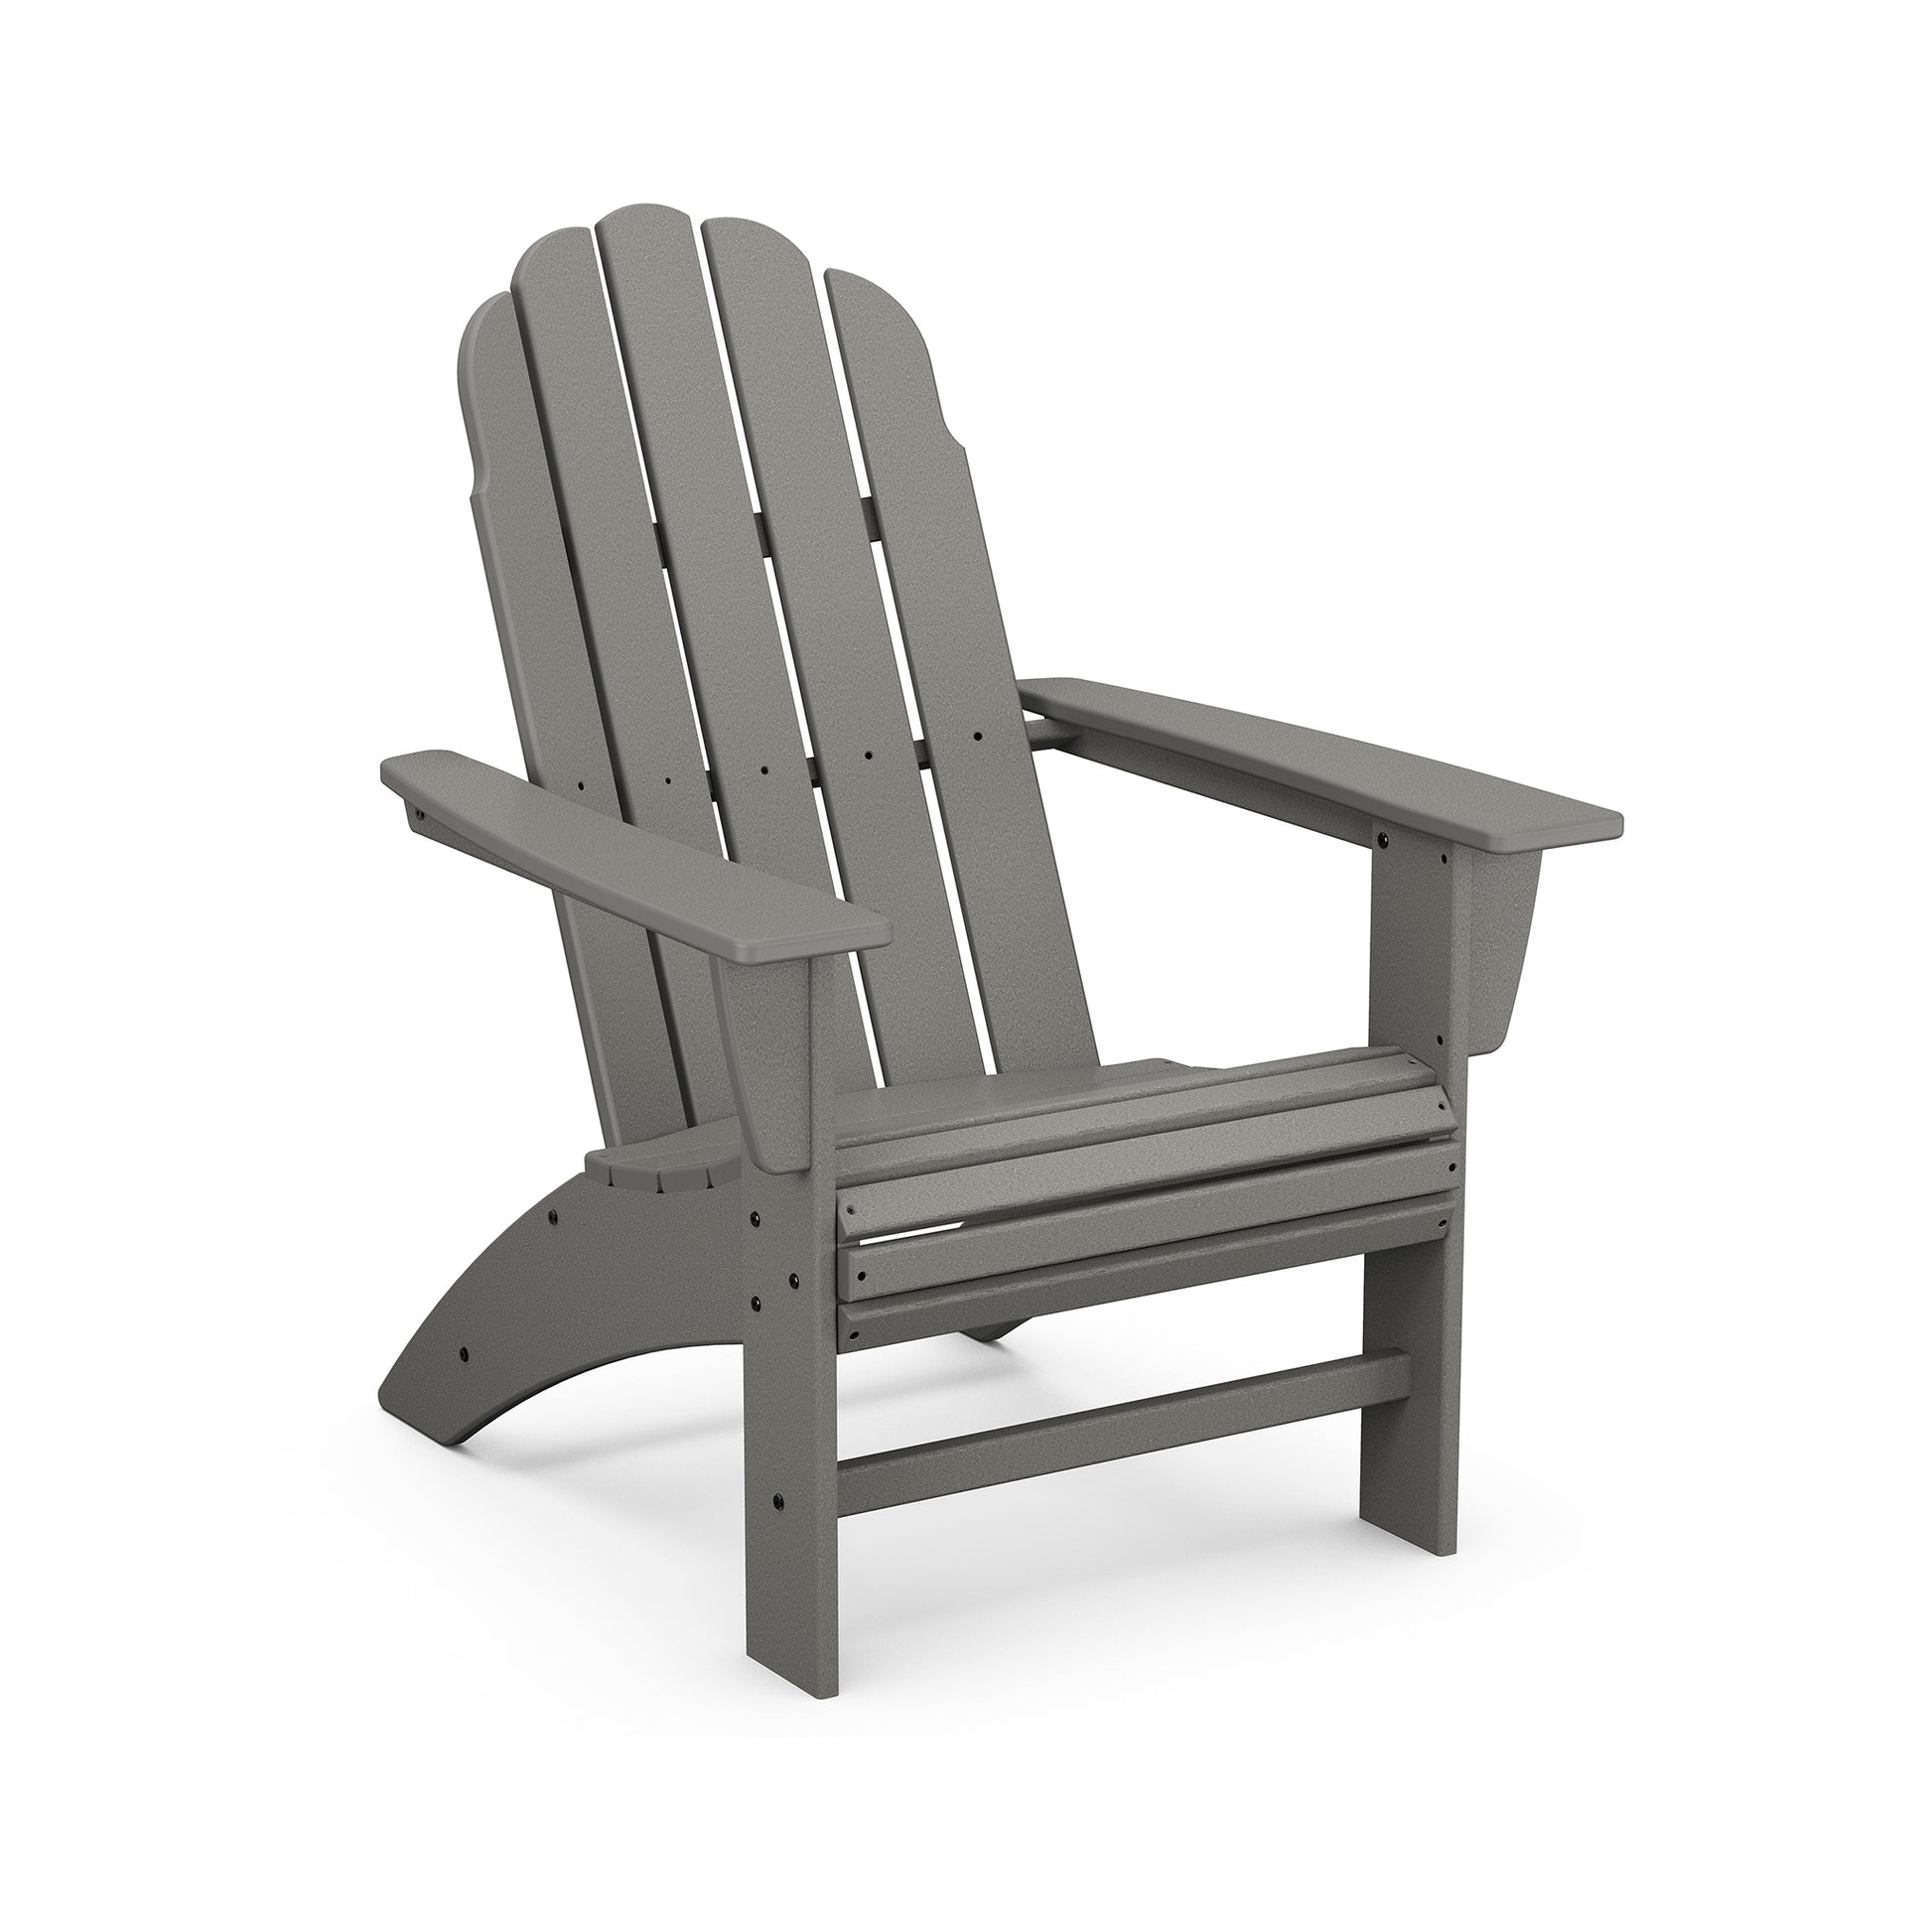 A modern gray POLYWOOD® Vineyard Curveback Adirondack chair made of plastic, shown against a plain white background. The chair features a slatted back and seat with wide armrests, designed as